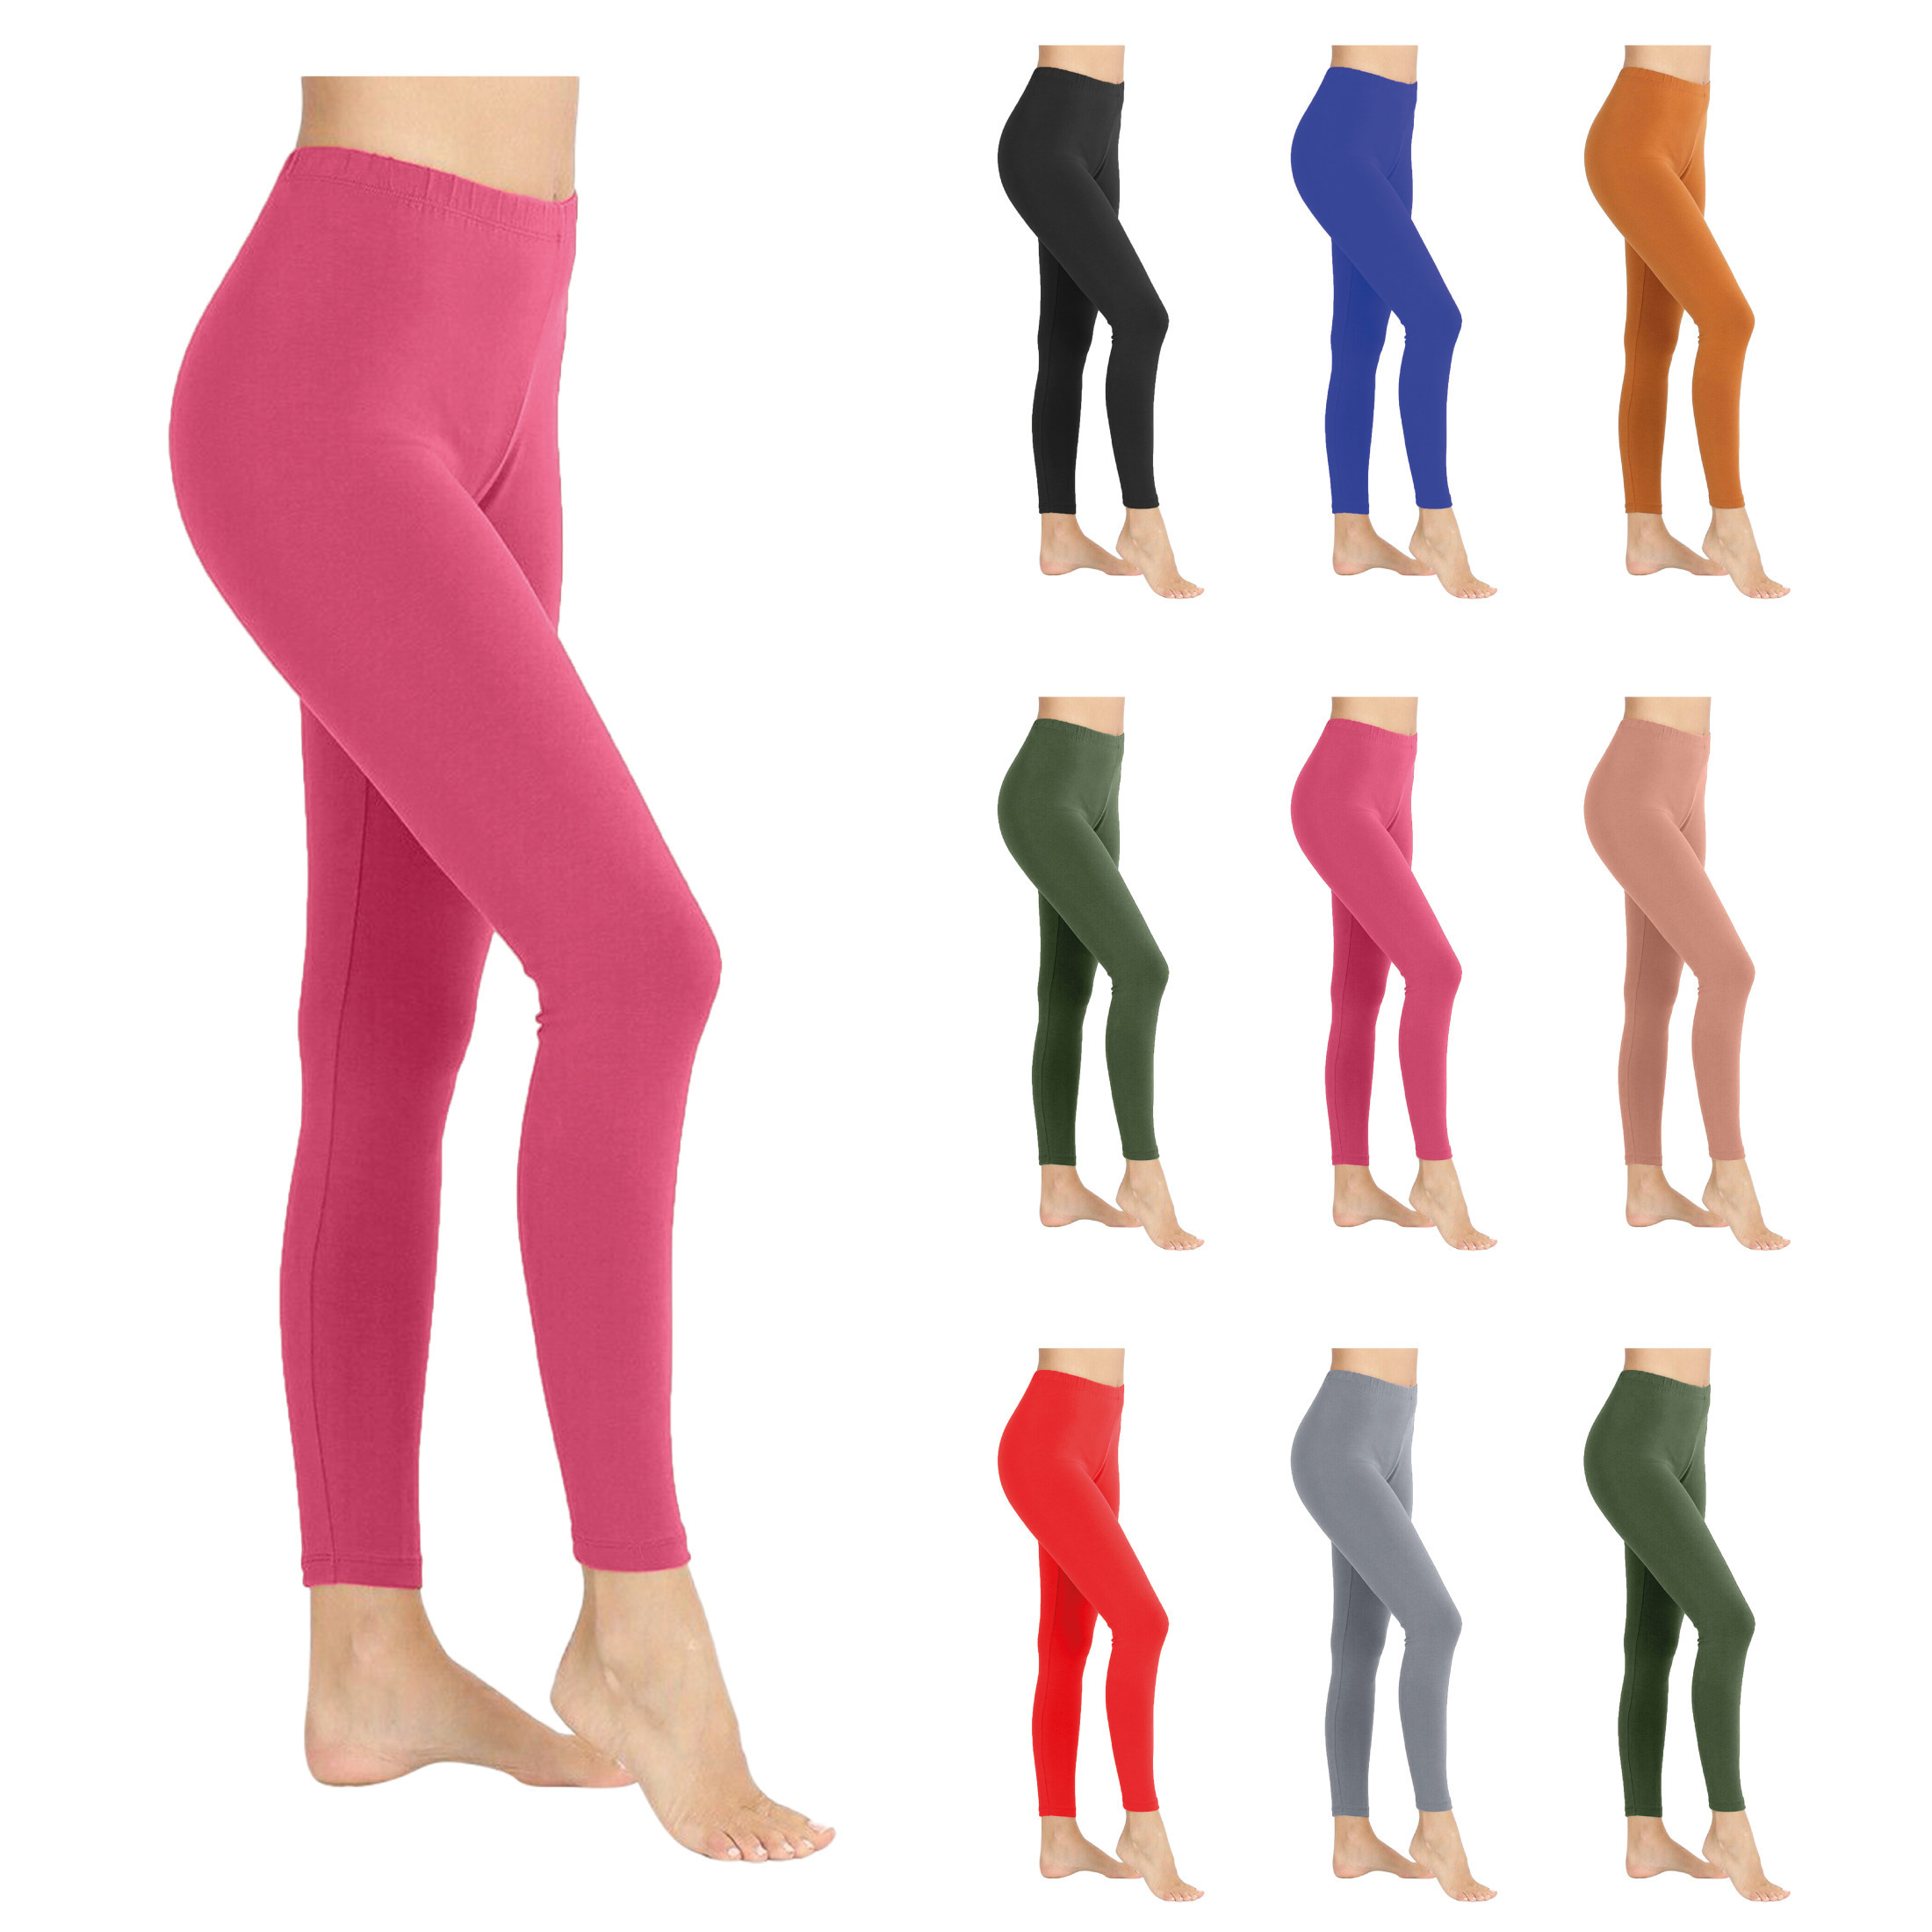 2-Pack: Ladies Solid High Waisted Soft Gym Yoga Sports Yummy Leggings - Large